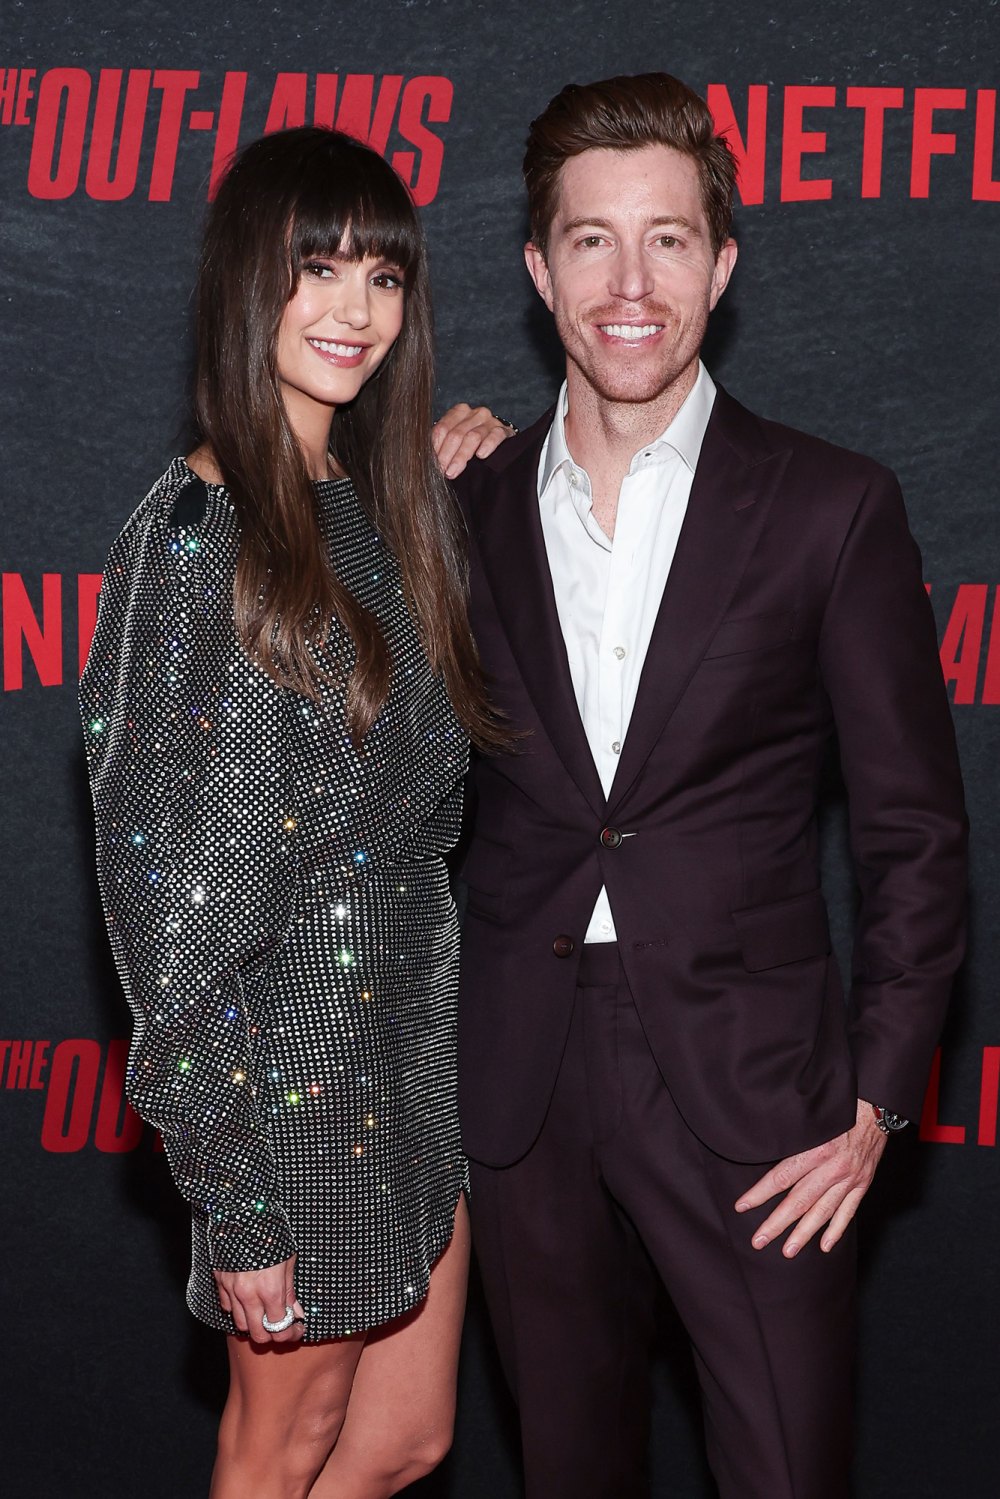 Shaun White Supports Nina Dobrev at The Out-Laws Movie Premiere